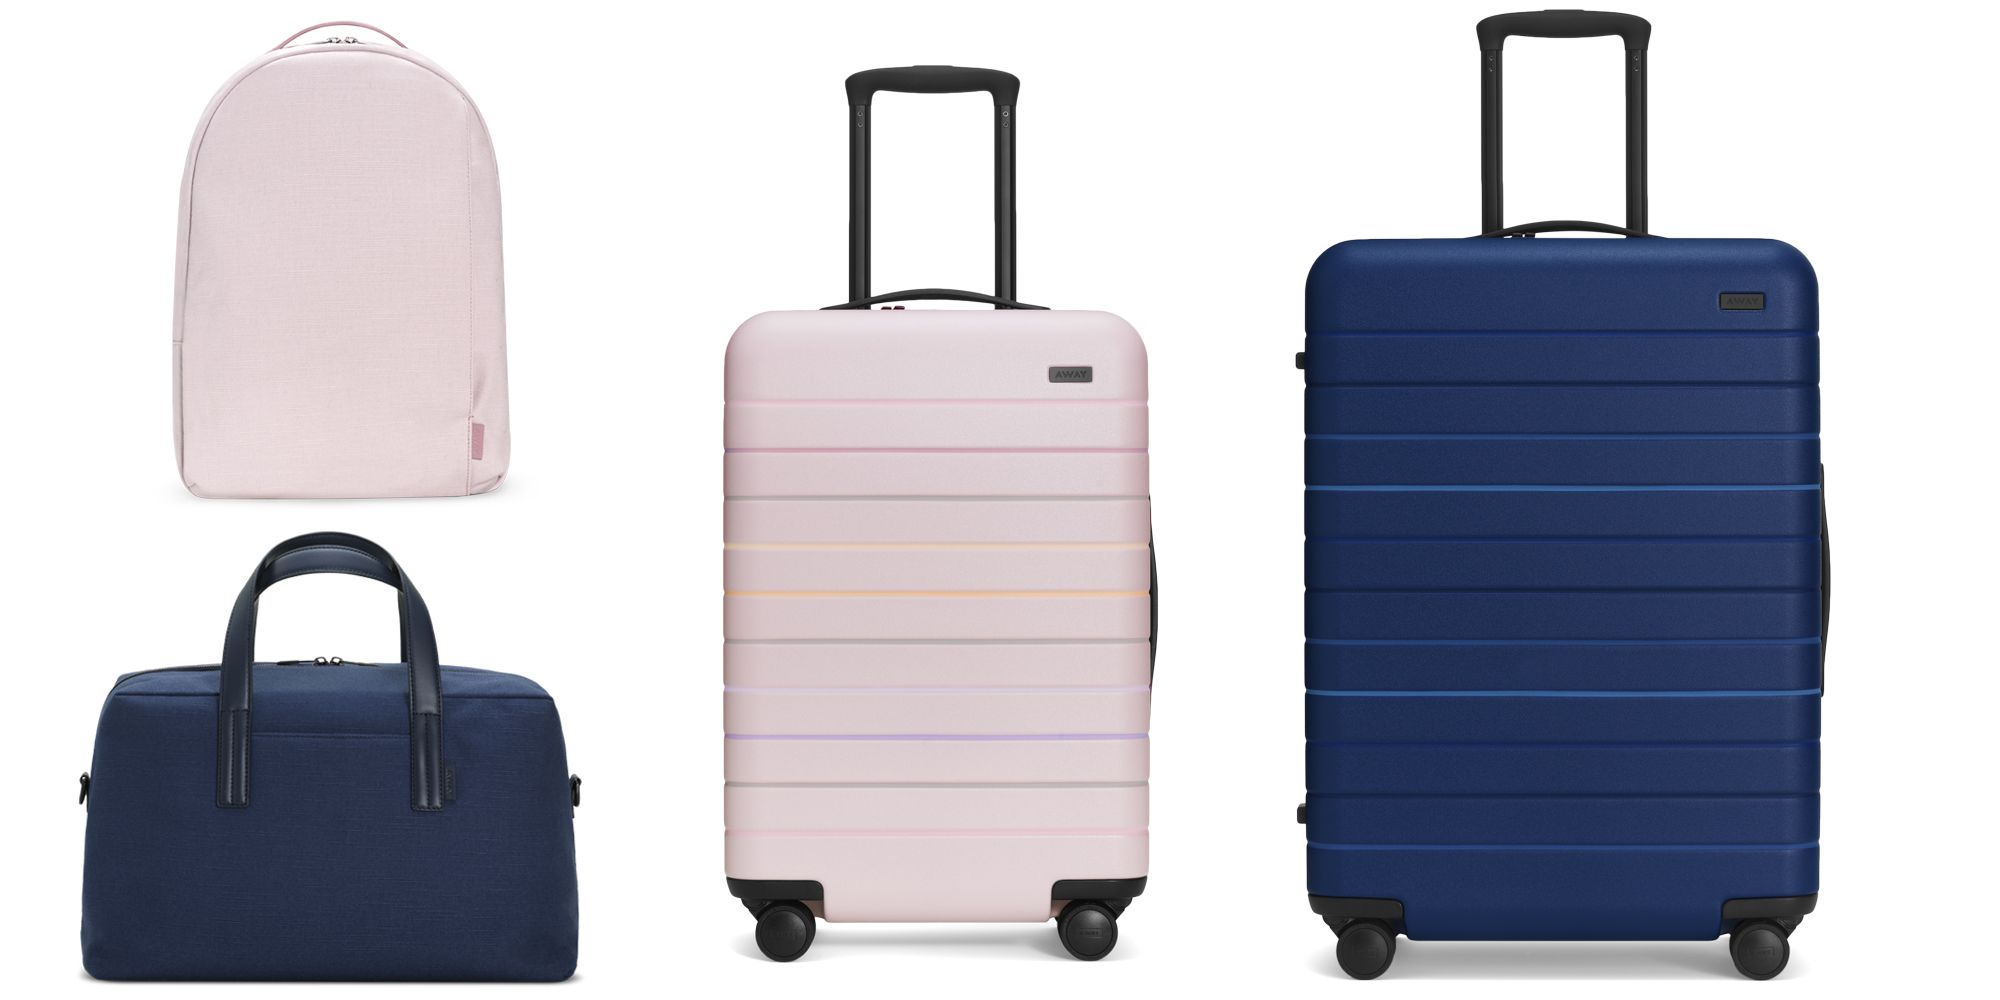 AWAY Travel The CARRY-ON PEARLIZED Color COAST Suitcase Durable